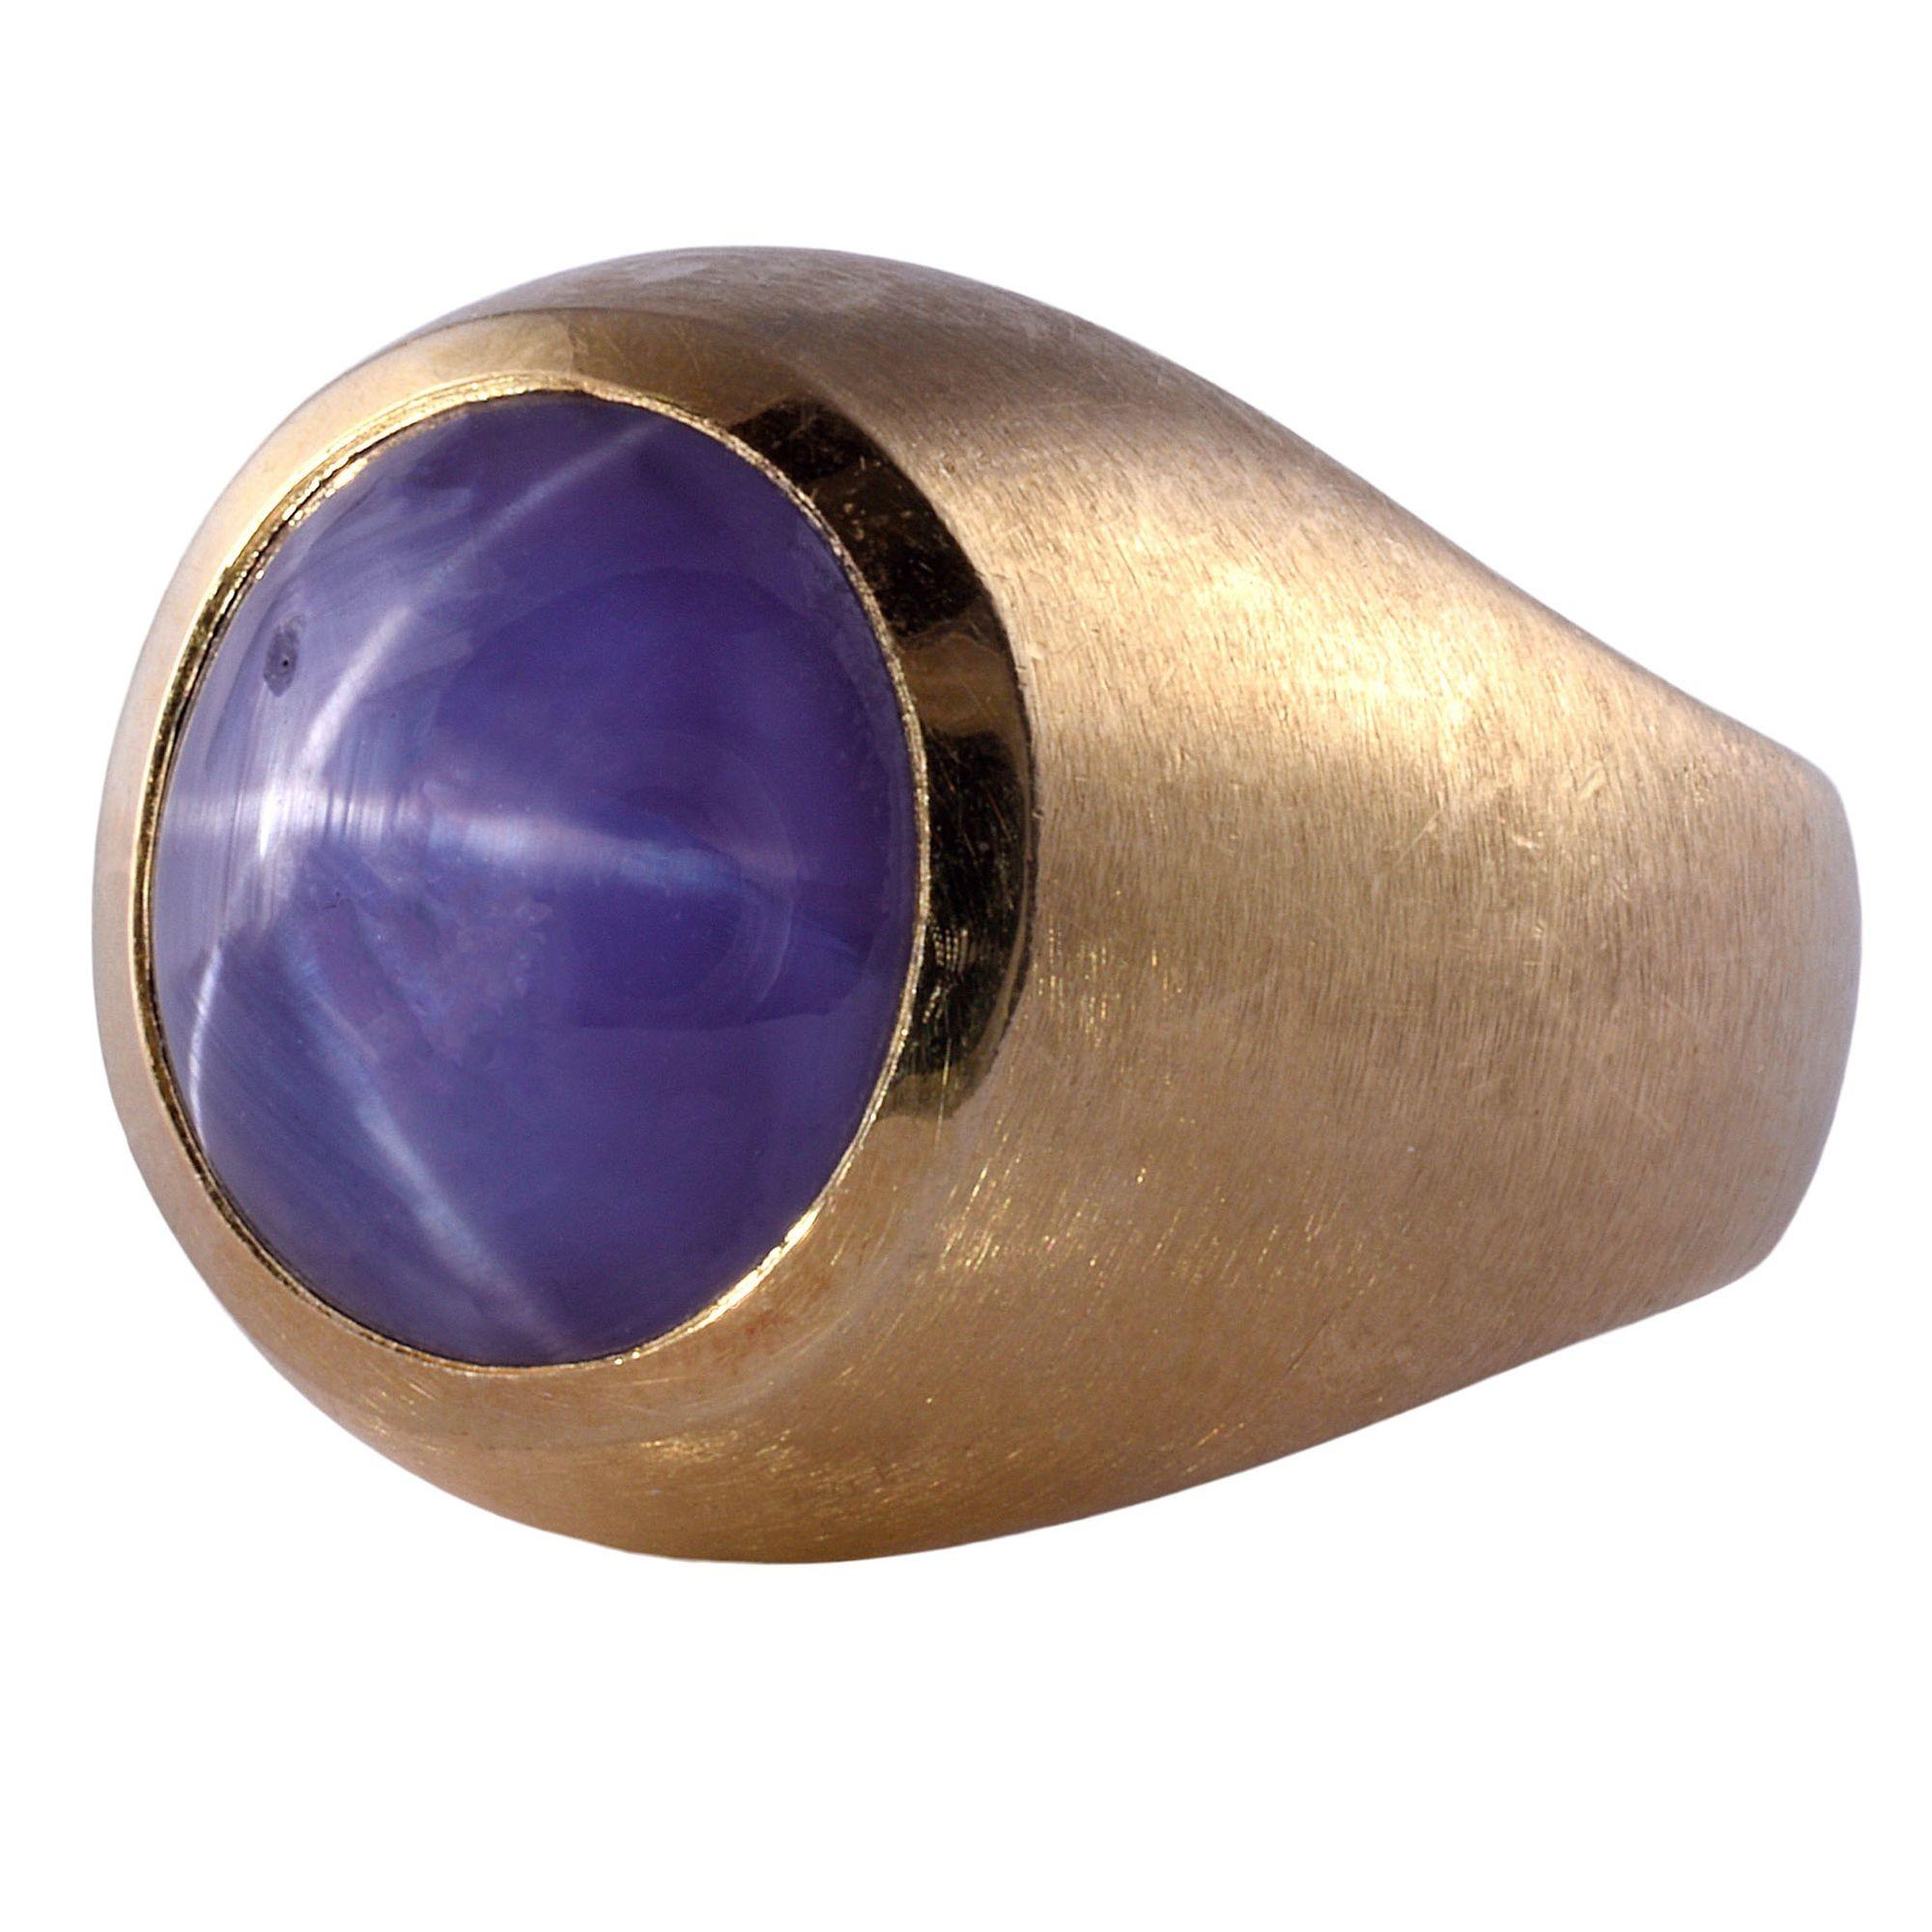 Vintage 16.75 carat purple star sapphire mens ring, circa 1980. This vintage mans ring is crafted in 18 karat yellow gold with a brushed finish. The vintage ring features a 16.75 carat purple star sapphire with nice color and a very good star. This